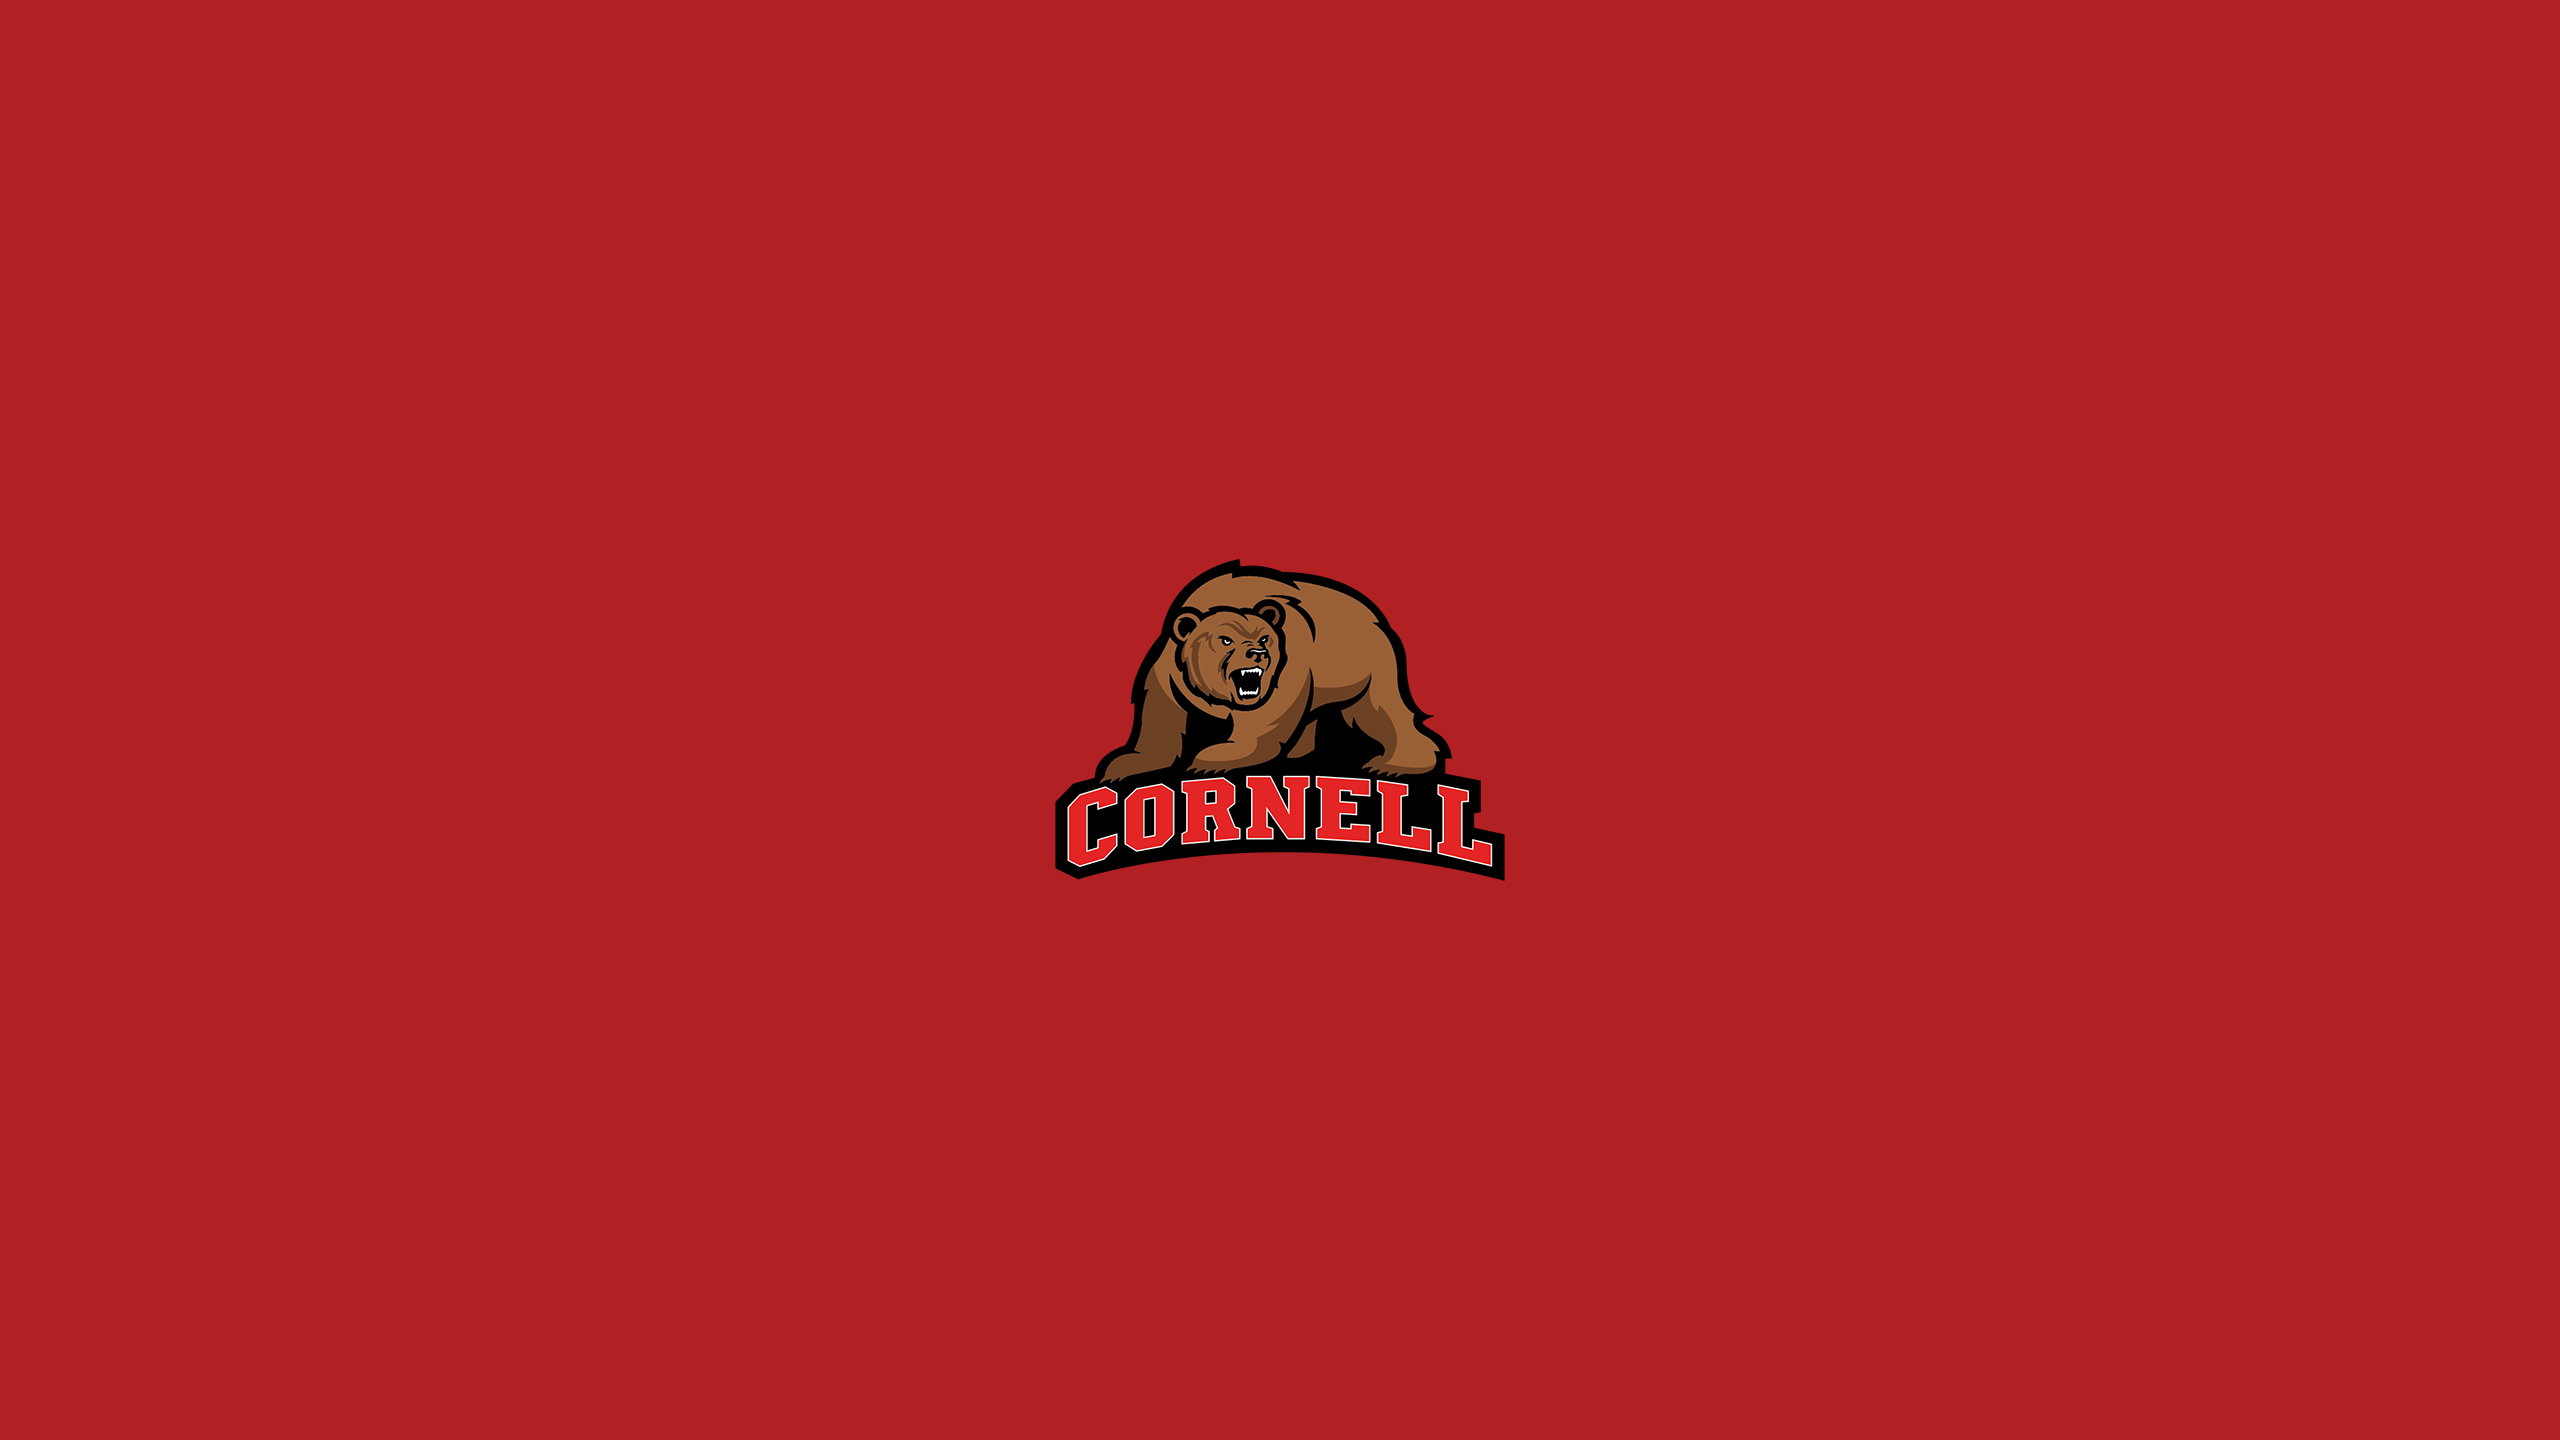 Cornell Big Red Basketball - NCAAB - Square Bettor